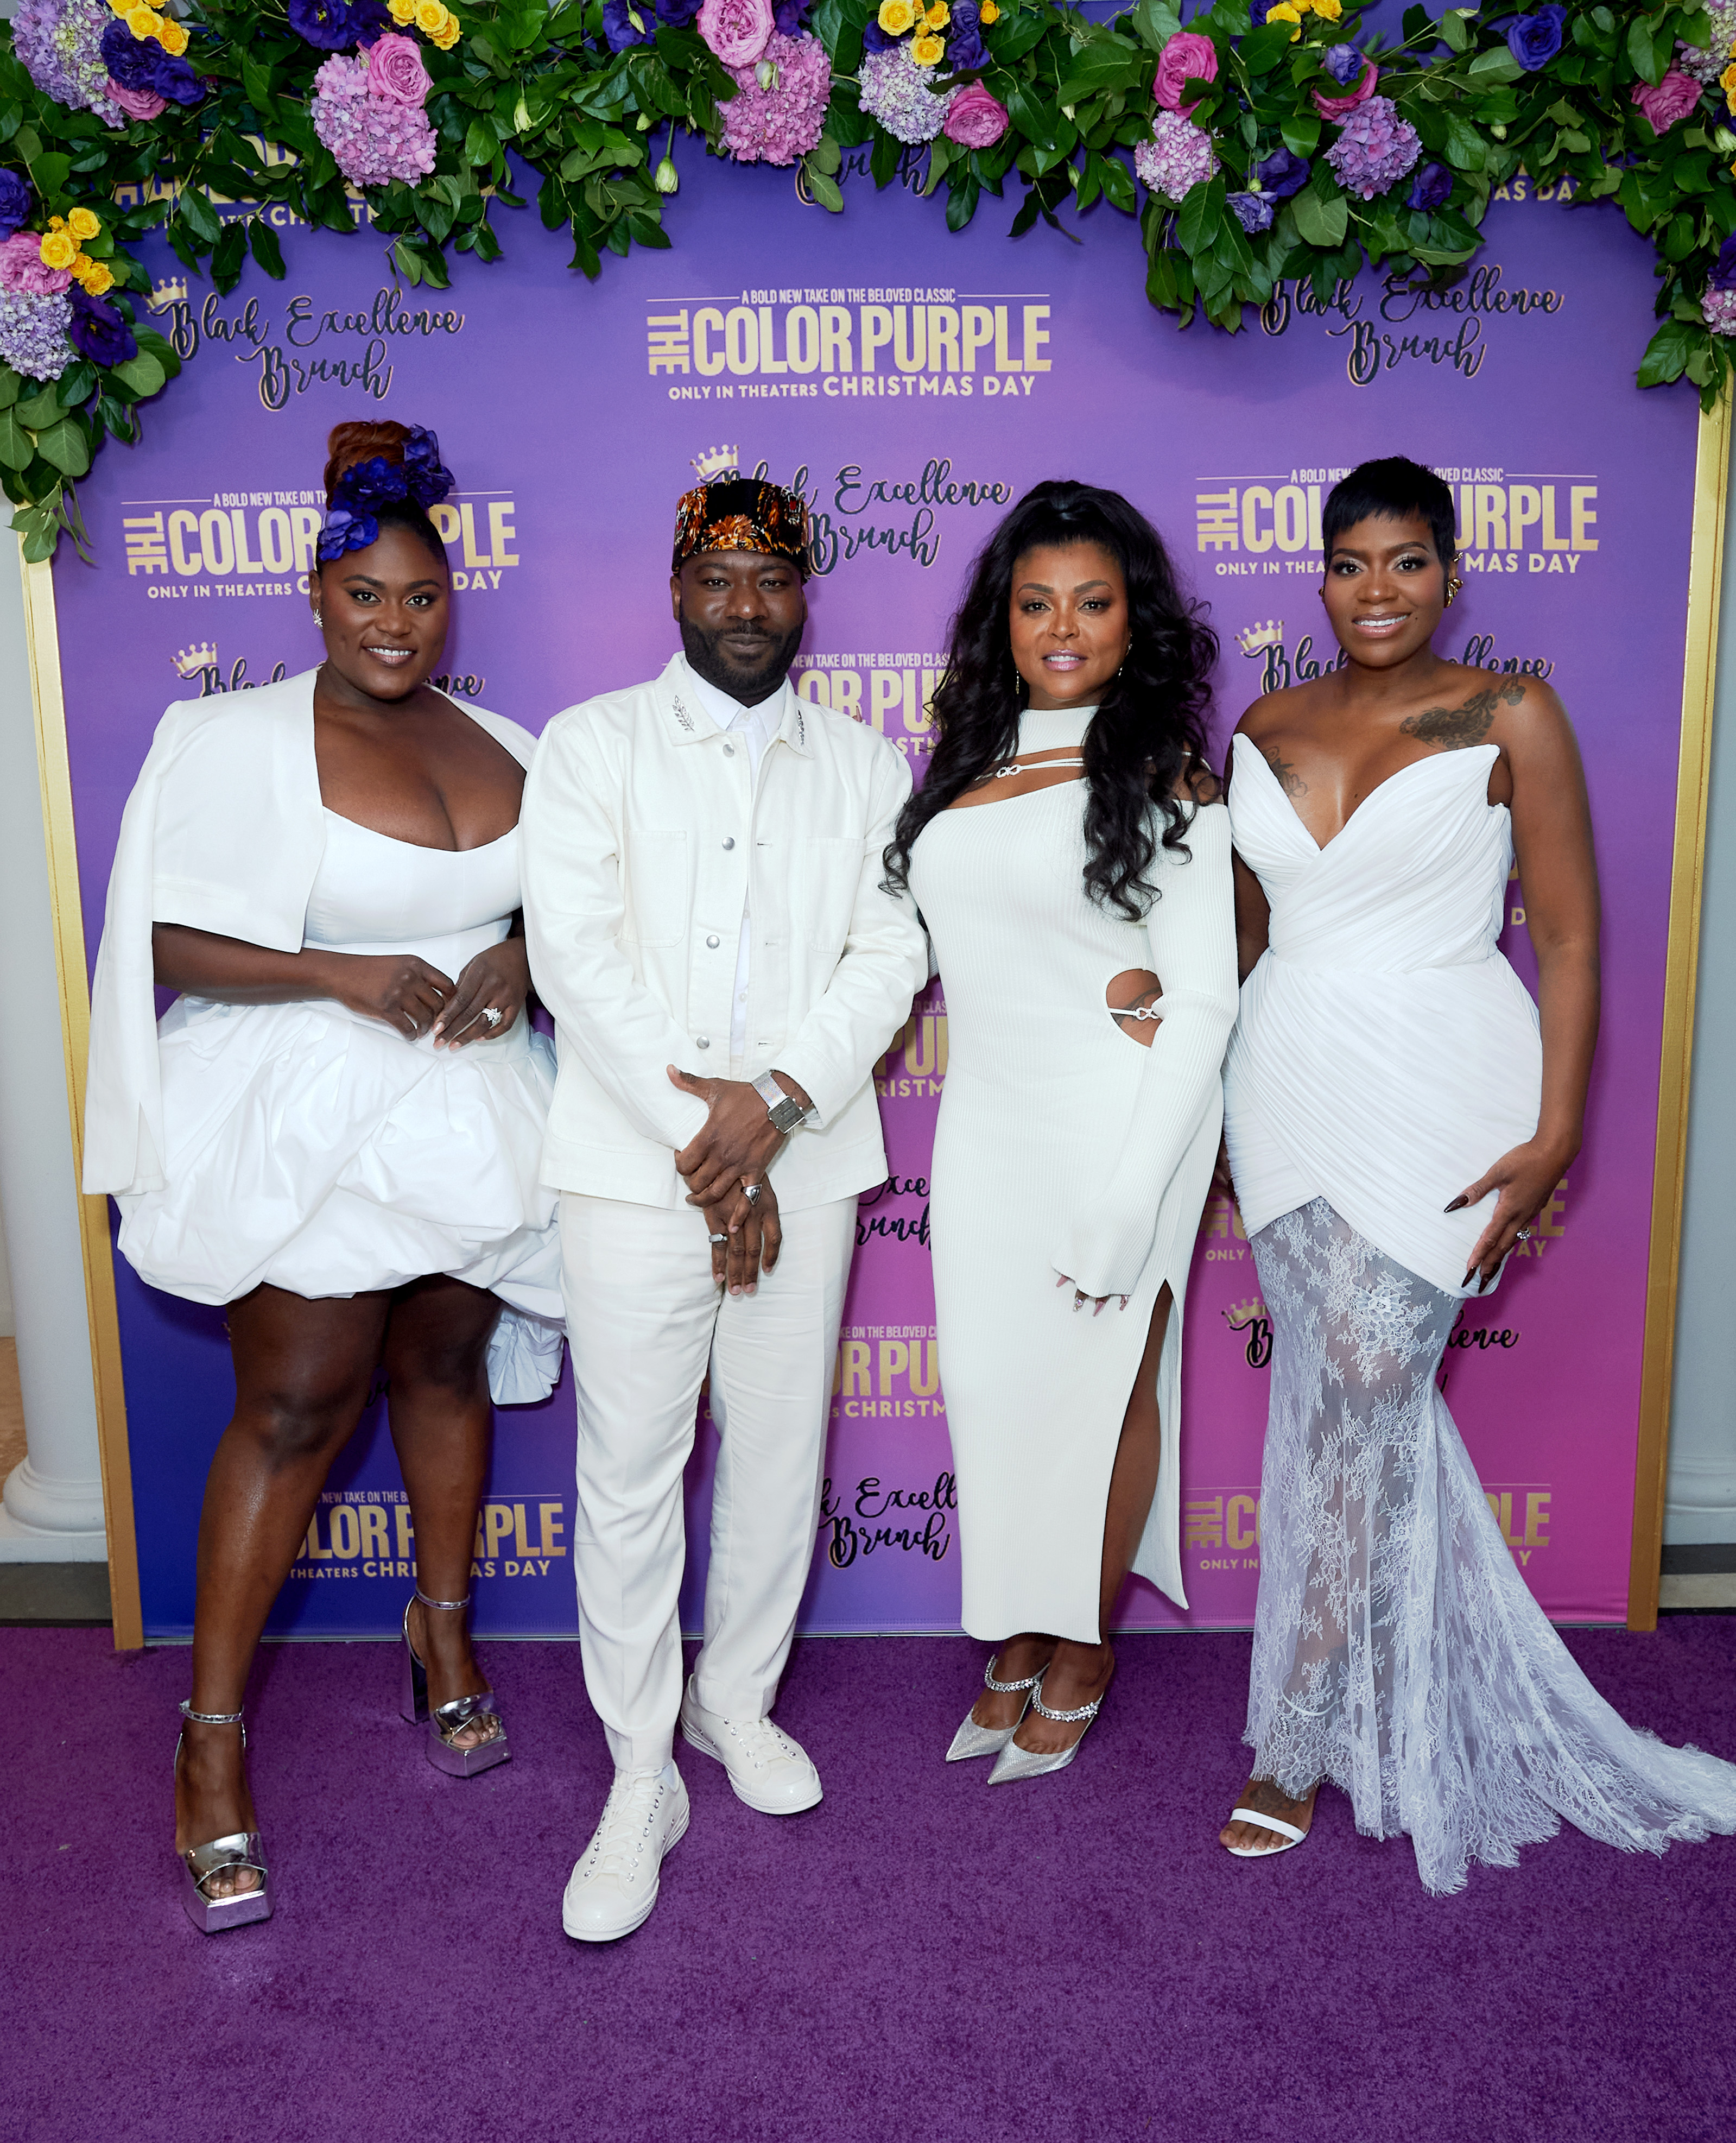 Black Excellence Brunch Celebrates "The Color Purple" Hosted By Trell Thomas